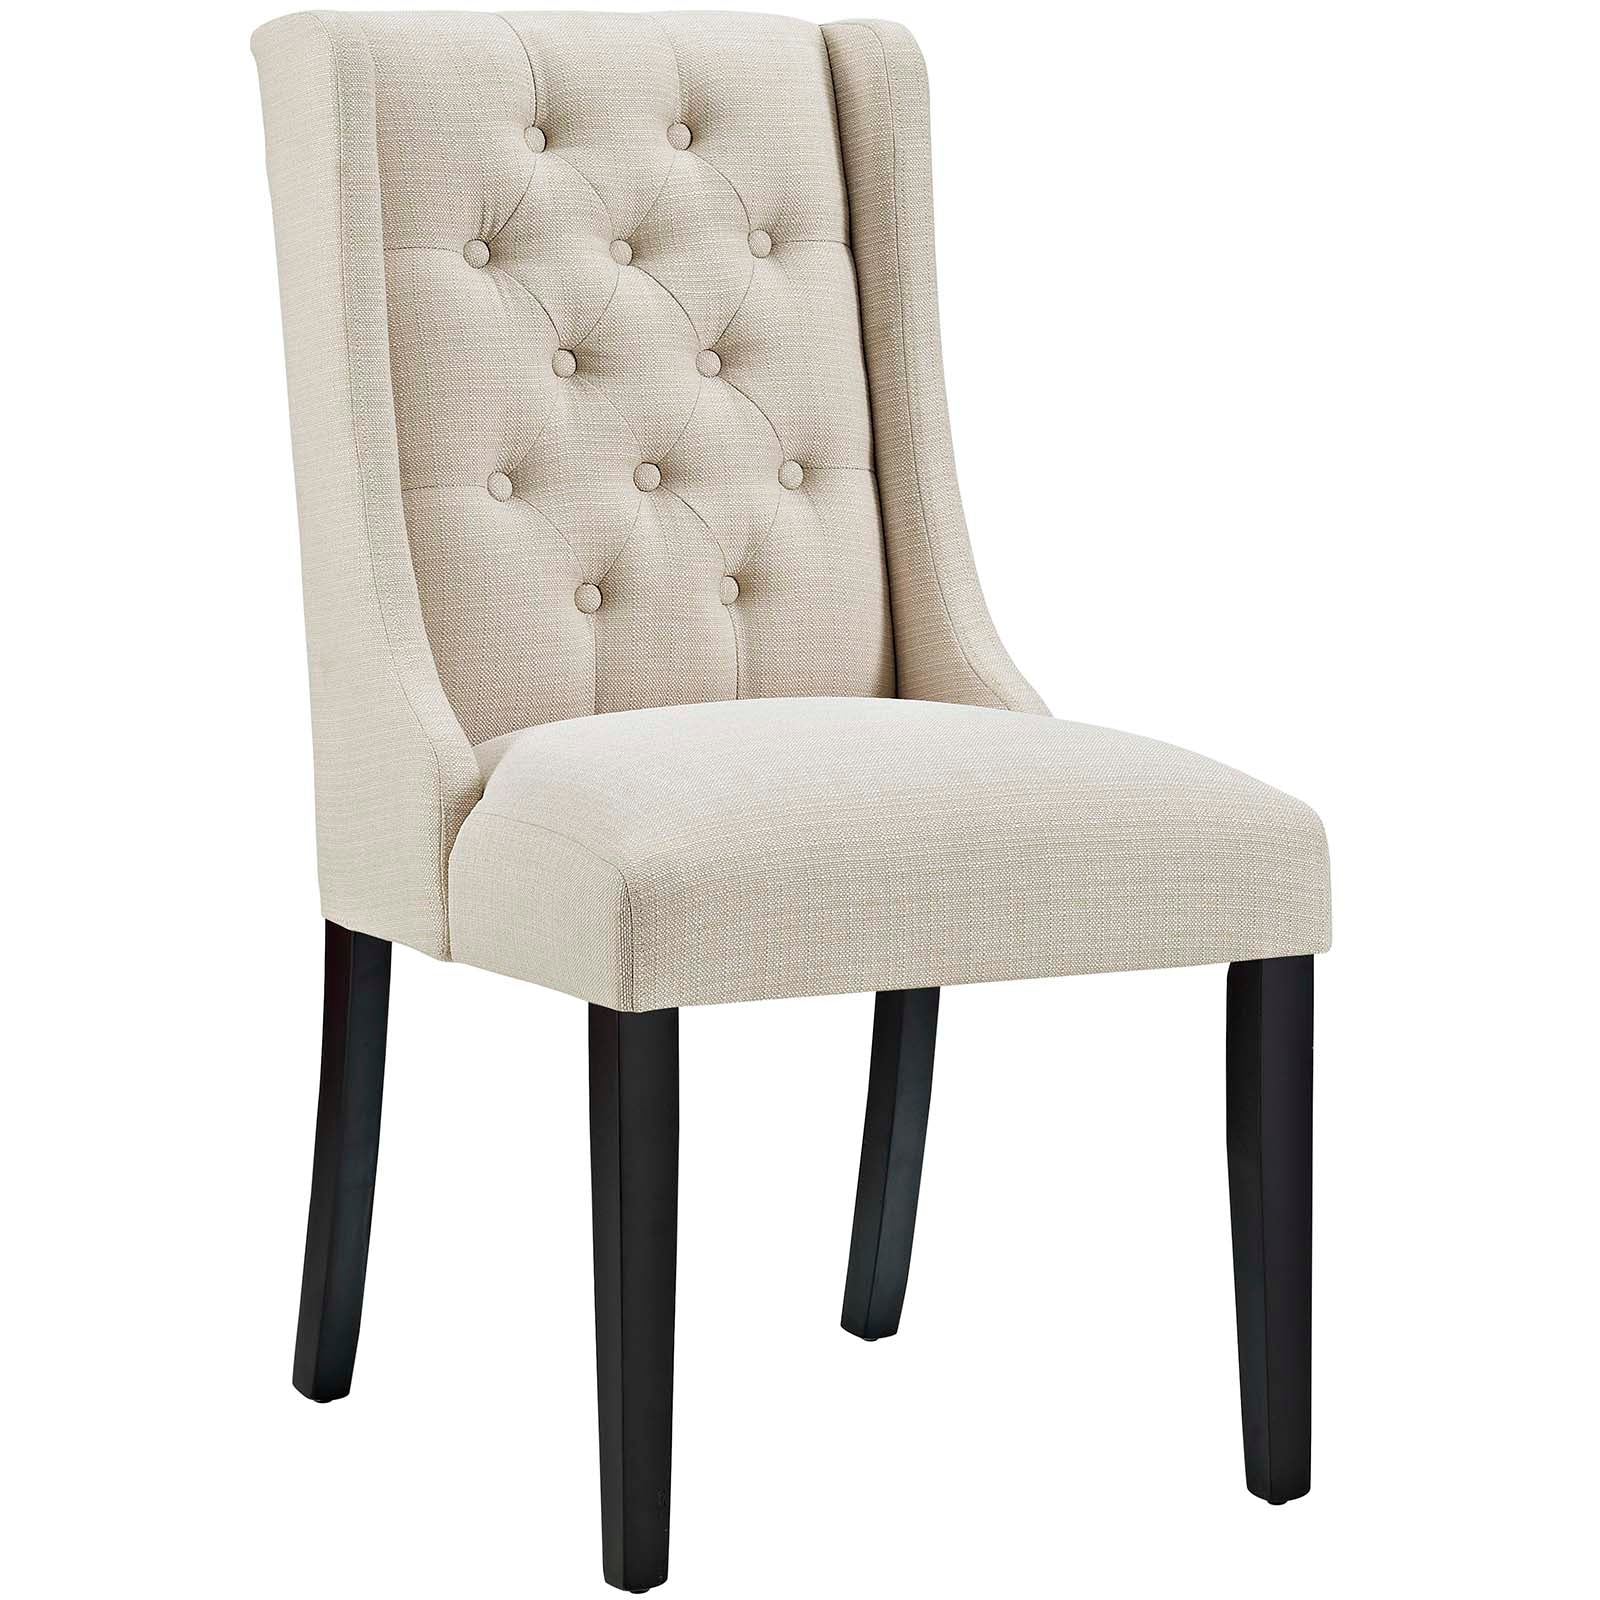 Modway Dining Chairs - Baronet Dining Chair Fabric Beige (Set of 4)